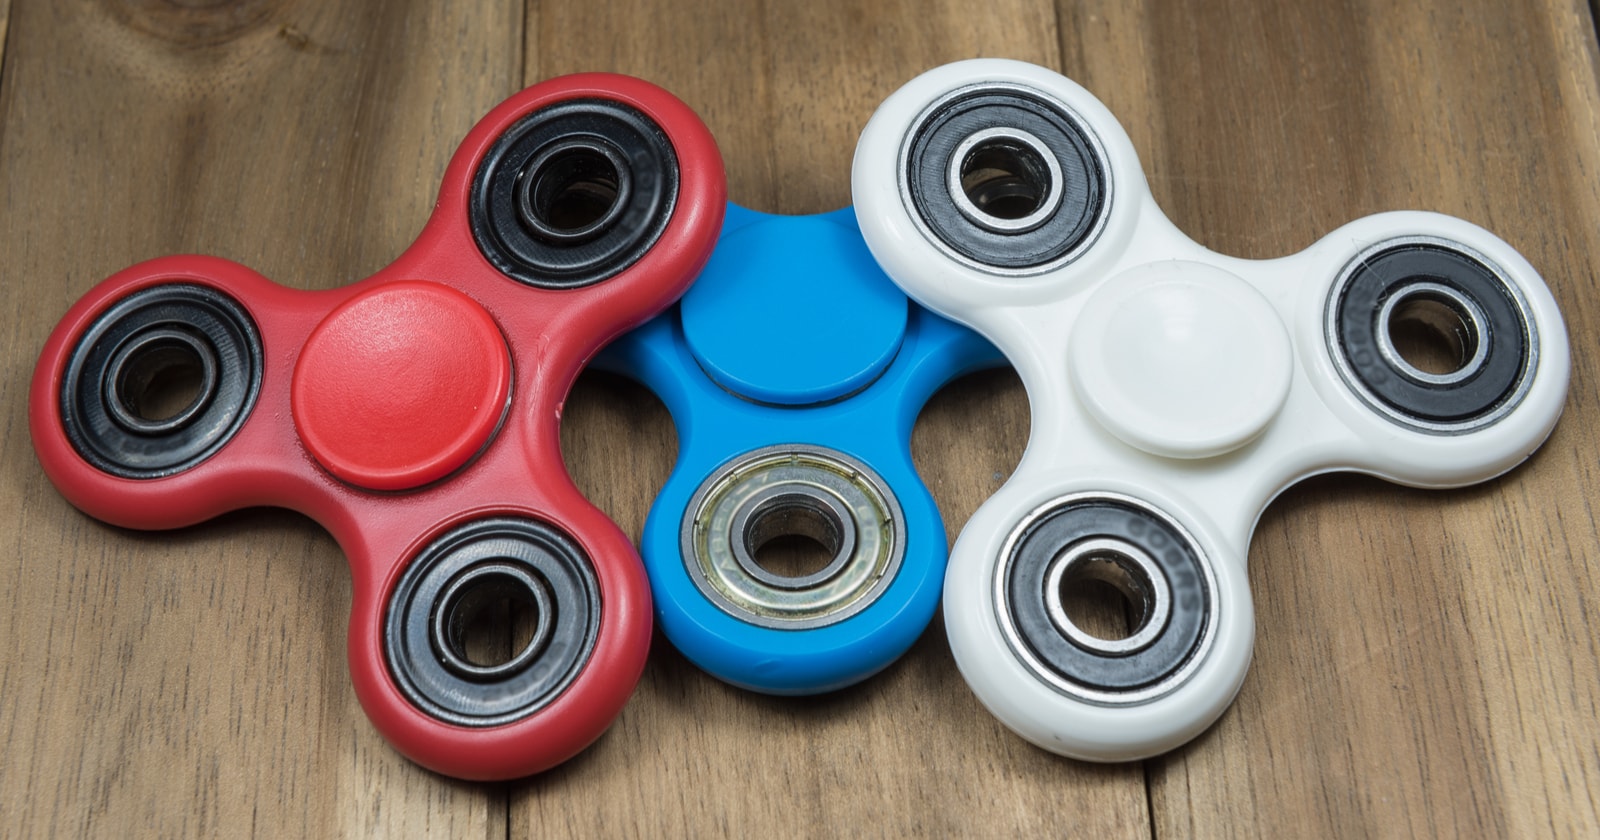 Google 'Spinner' - Search giant reveals ultimate Fidget Spinner that's  never out of stock